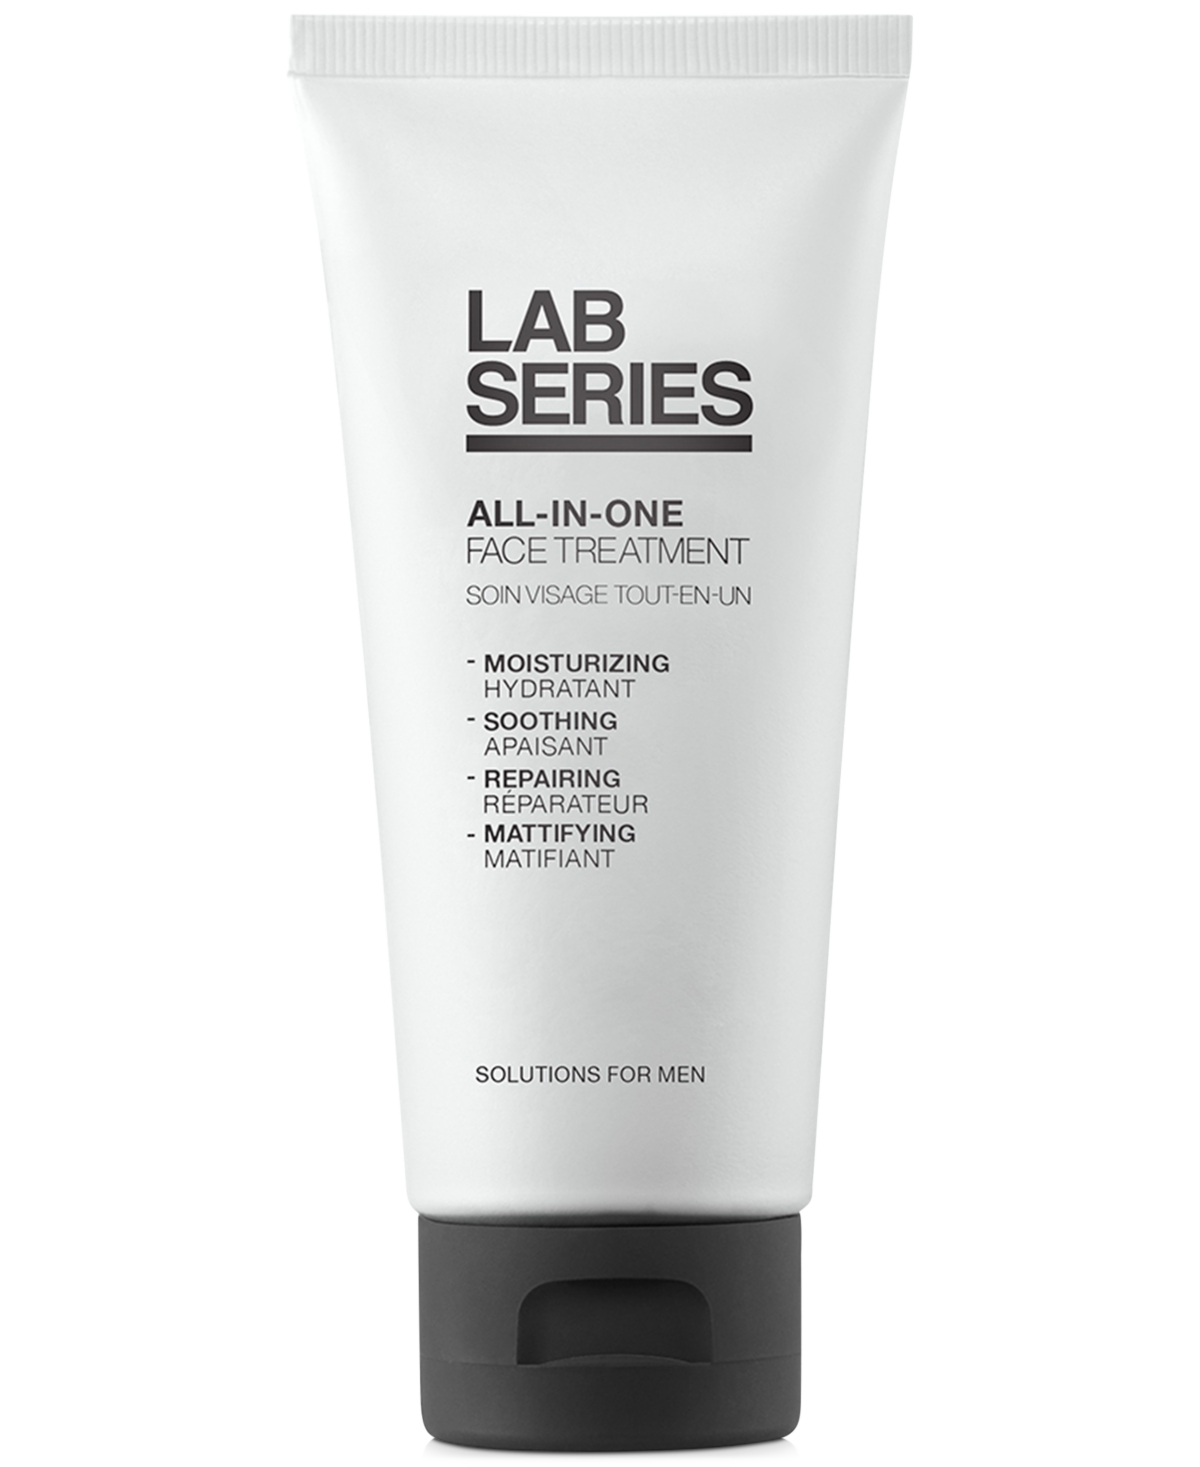 Lab Series All-In-One Face Treatment, 1.7-oz.